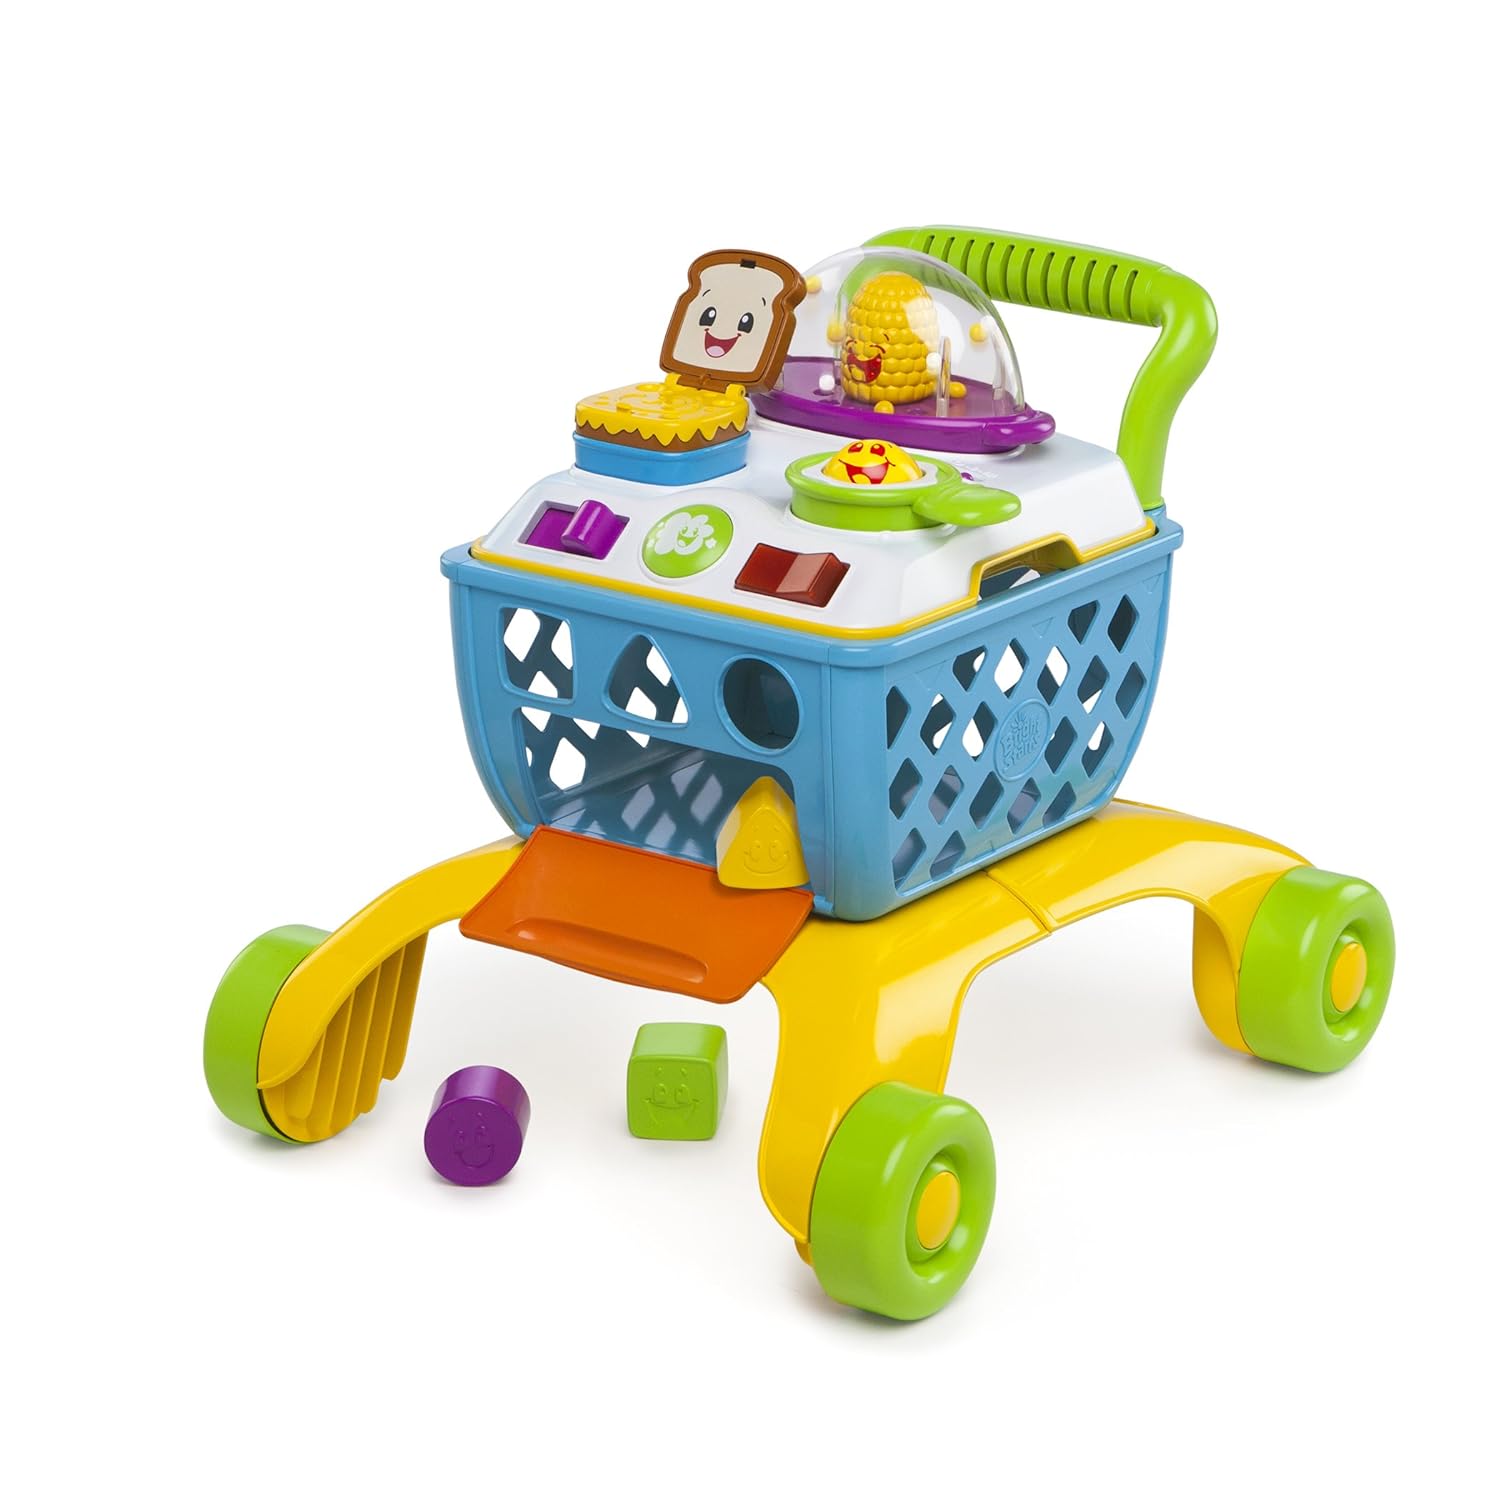 Bright Starts Giggling Gourmet 4-in-1 Shop ‘n Cook Walker Shopping Cart Push Toy